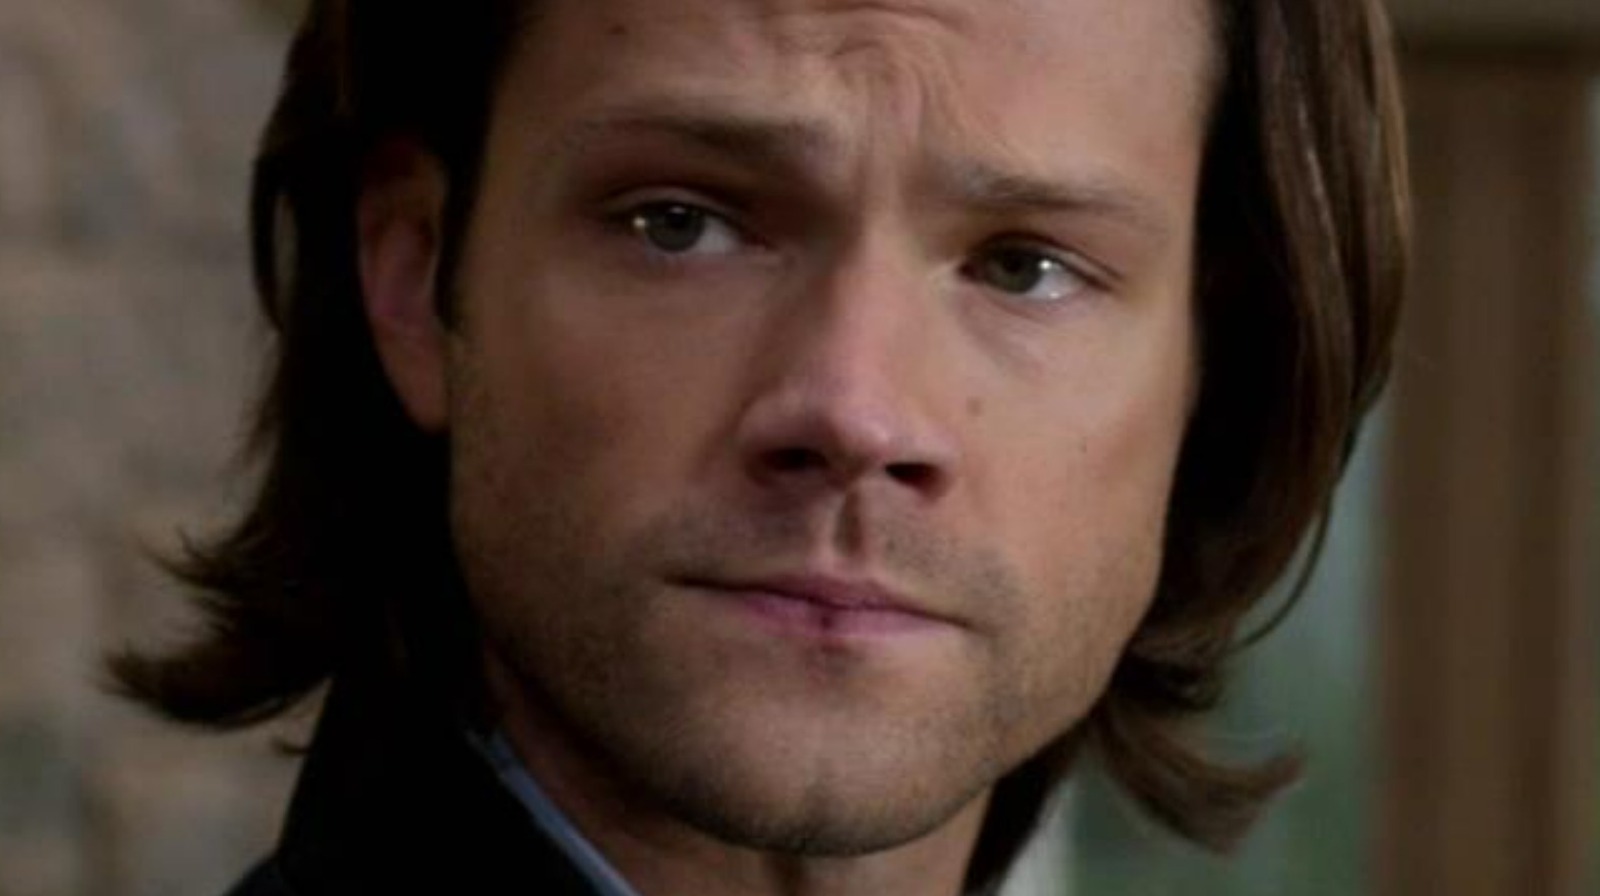 Supernatural fans can’t make it past this season finale without sobbing